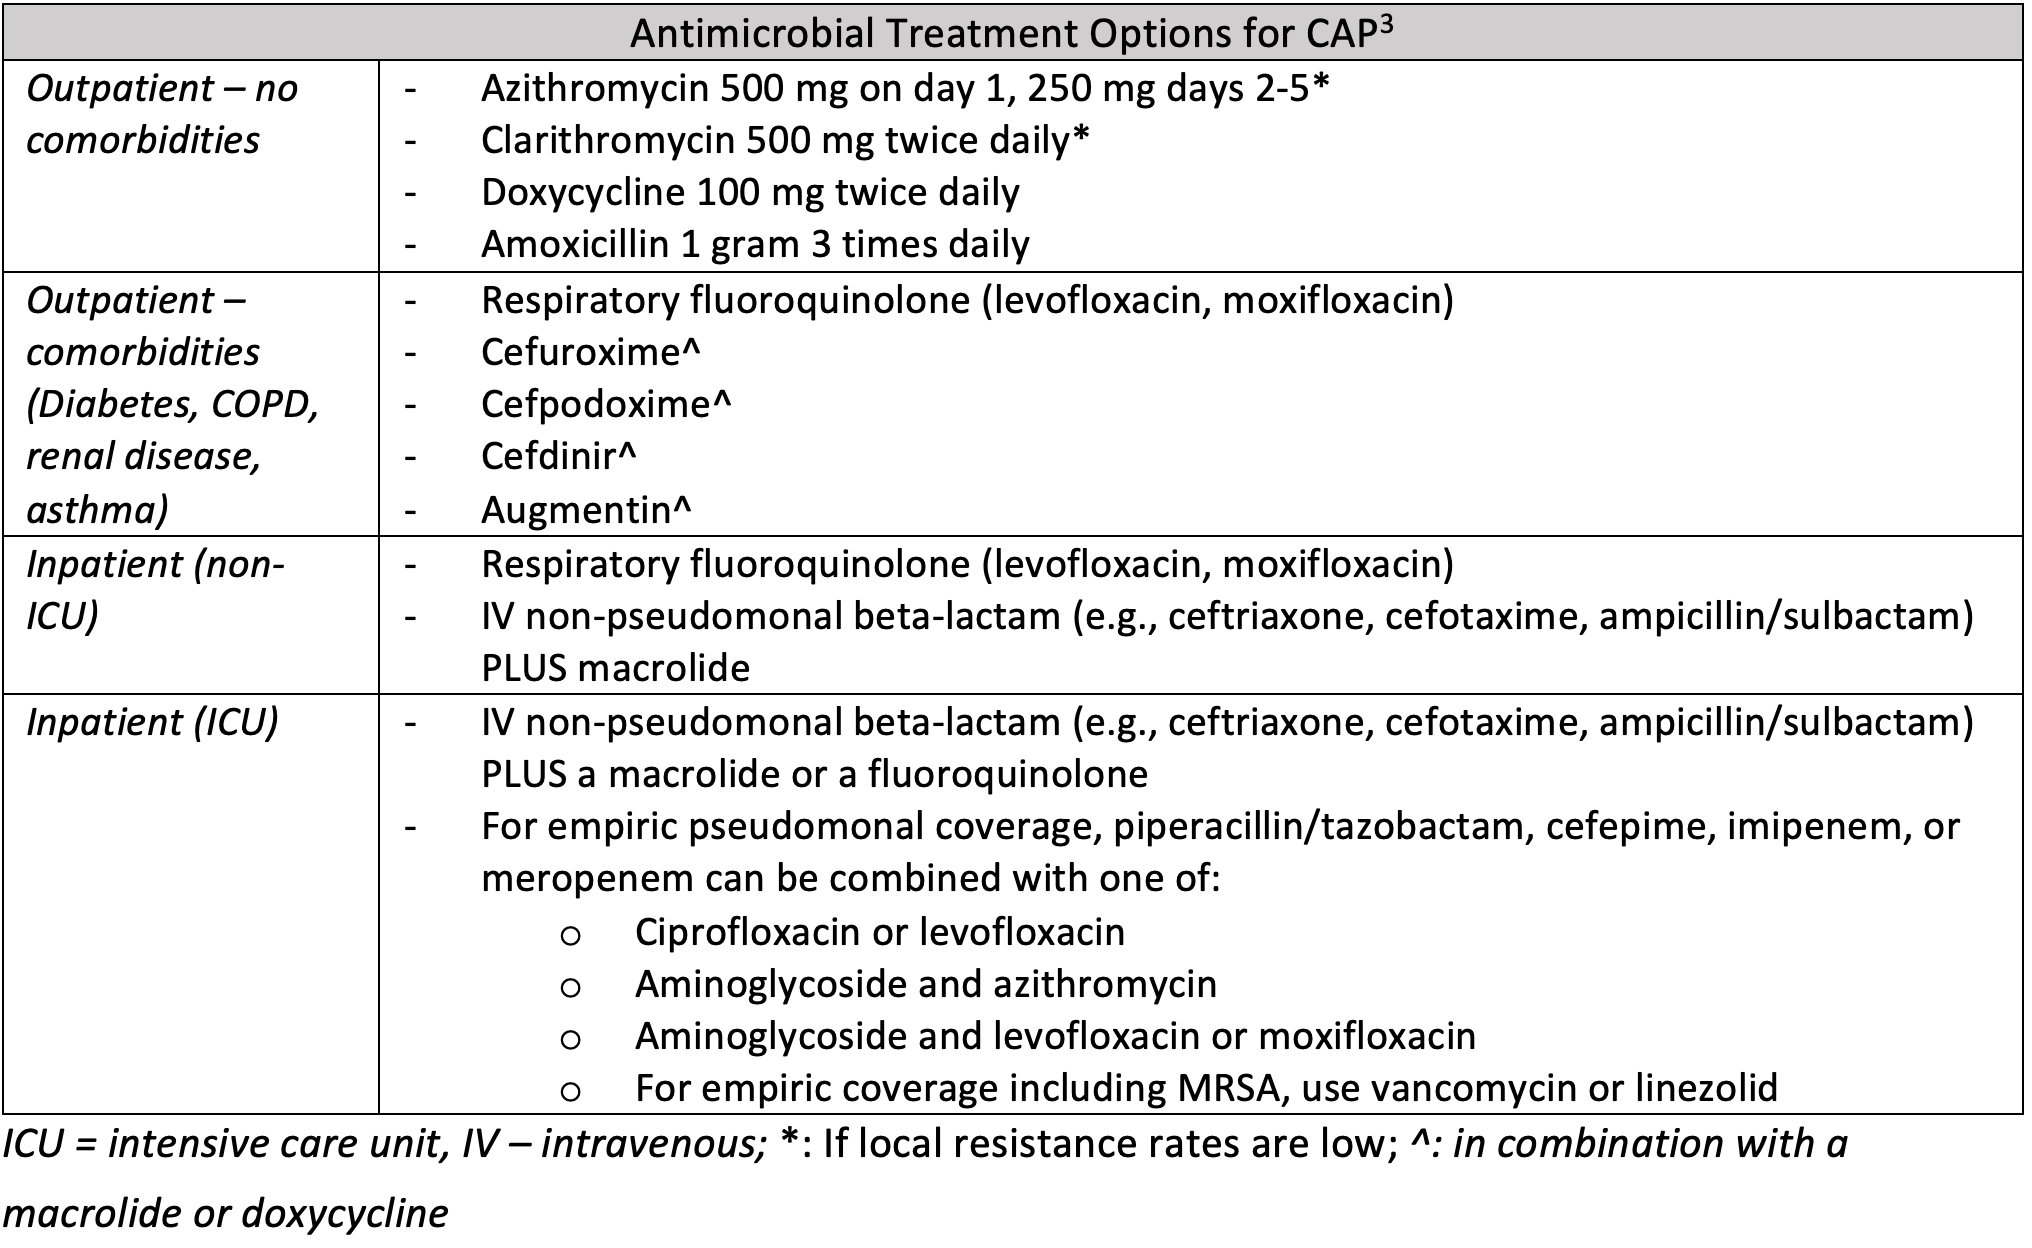 Antimicrobial Treatment Options for CAP3